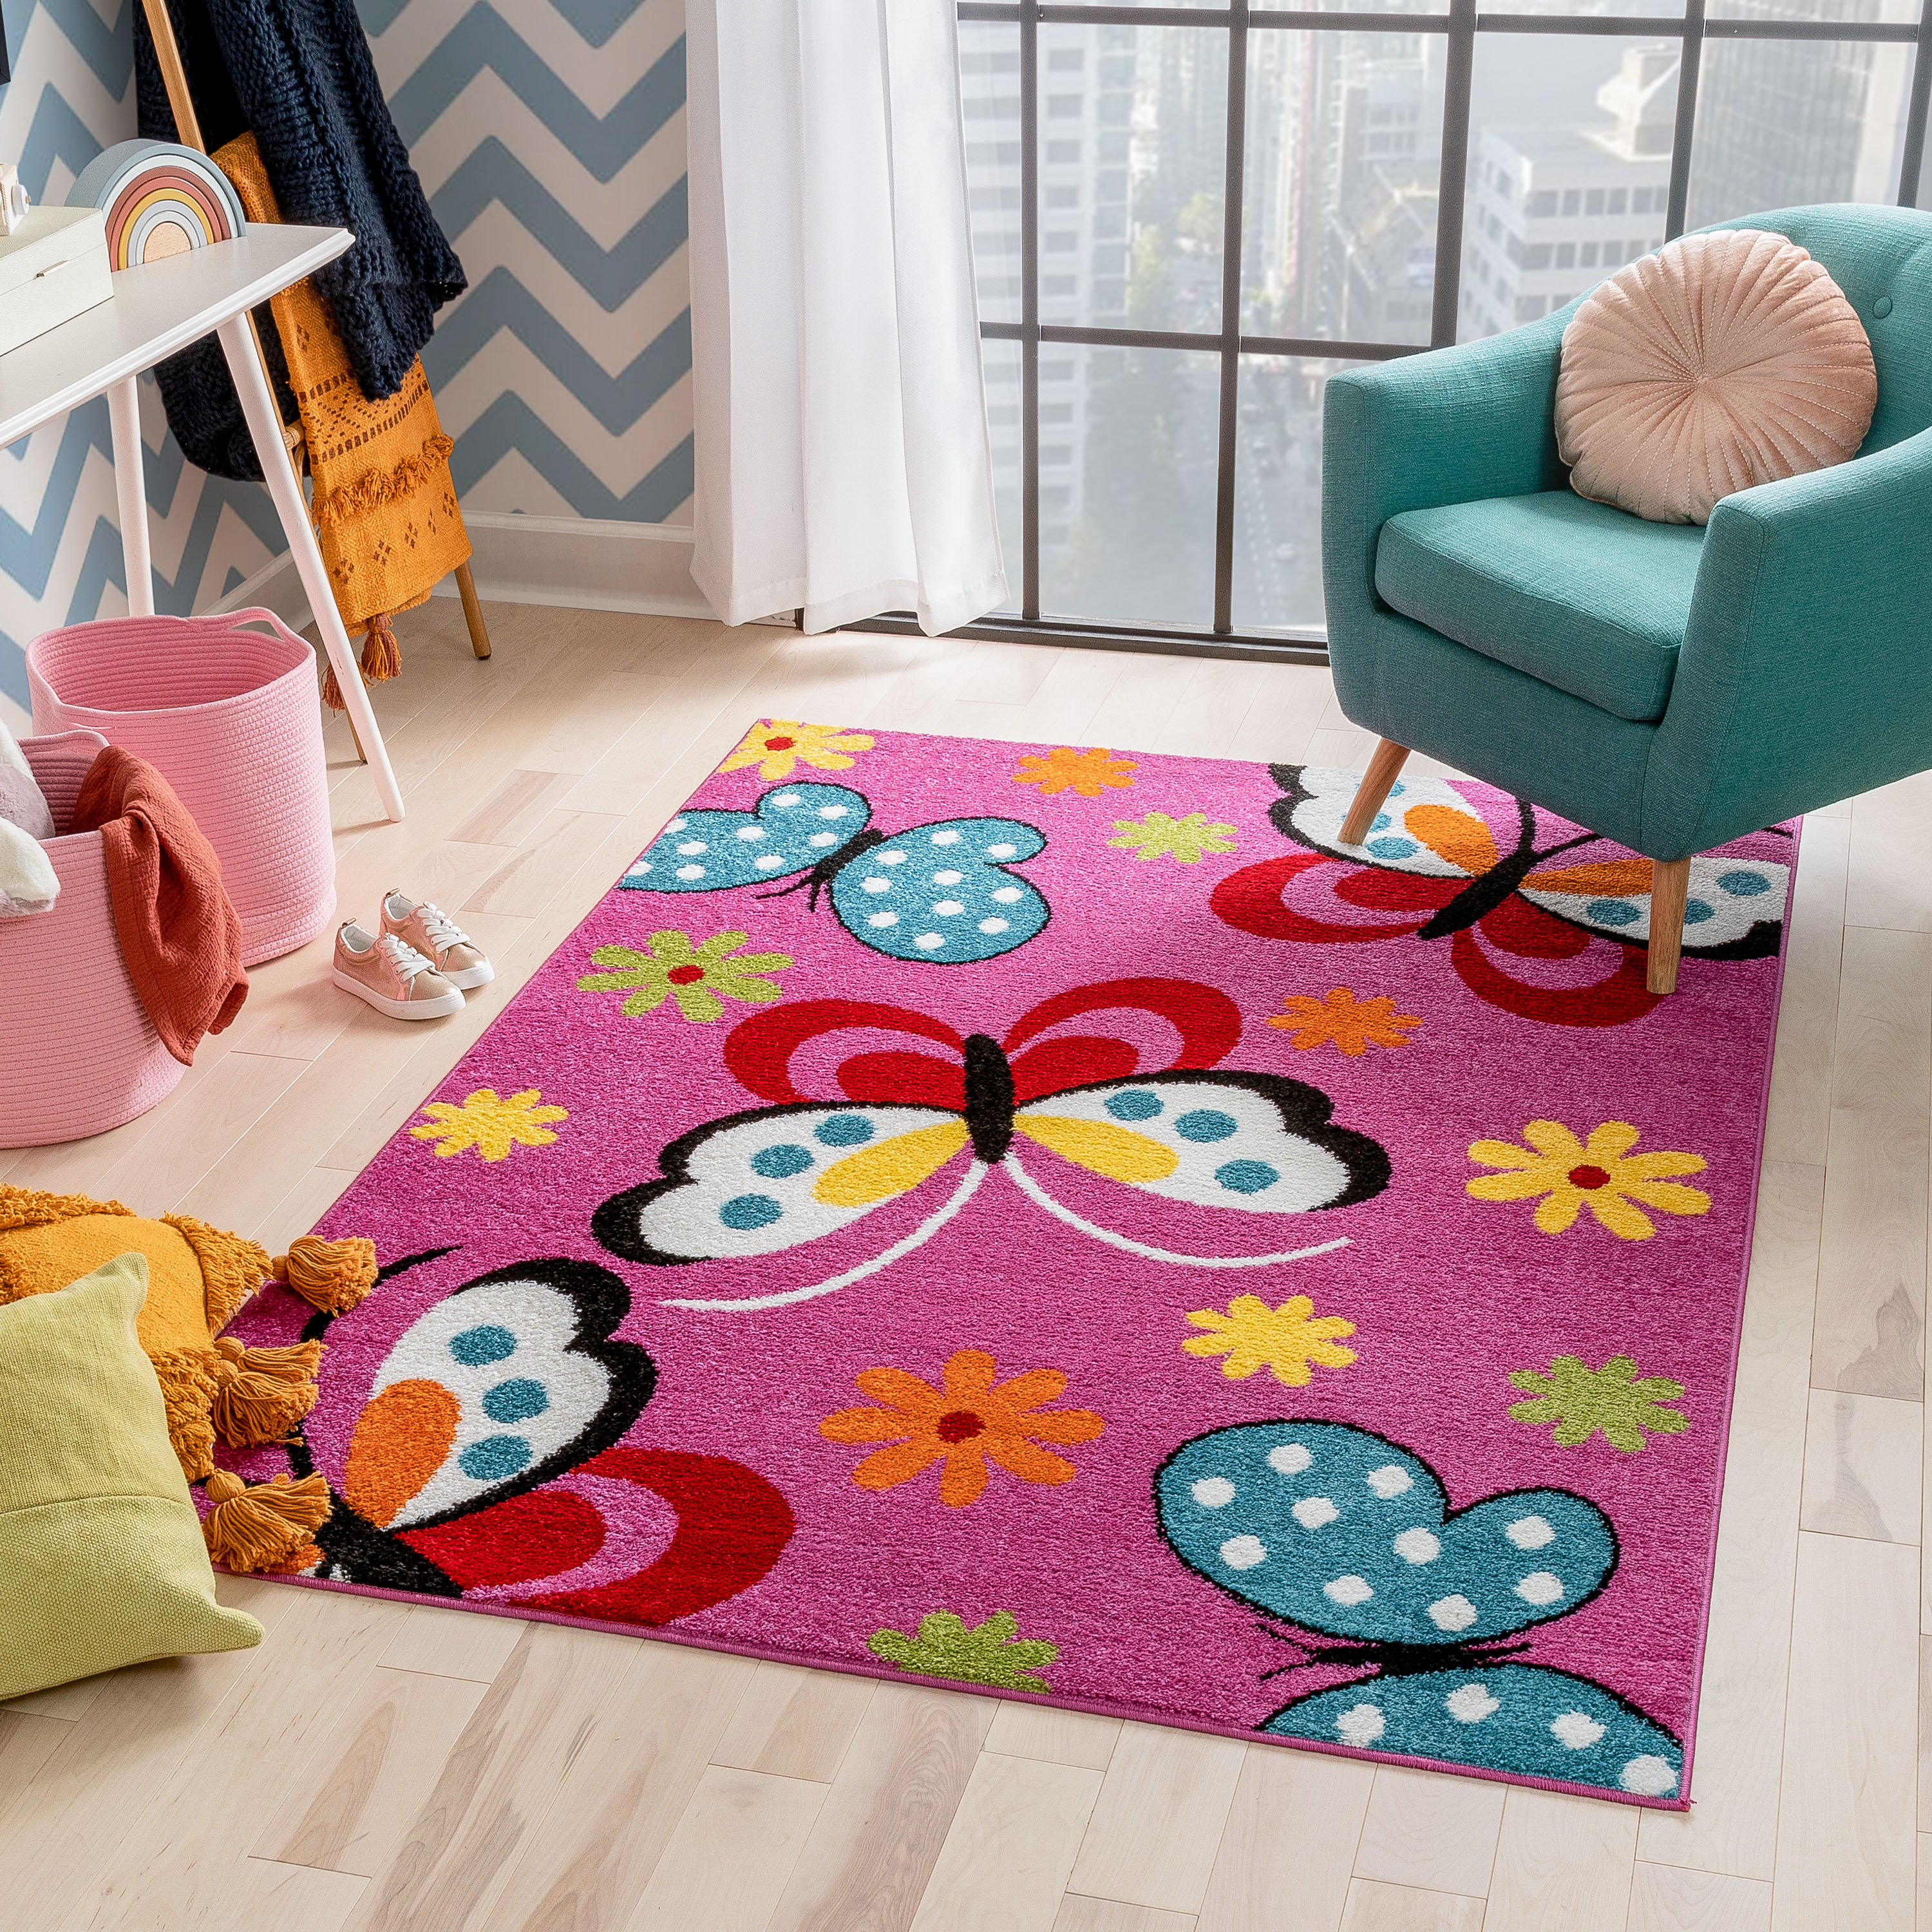 Well Woven Star Bright Daisy Butterflies Kids Area Rug - image 1 of 8